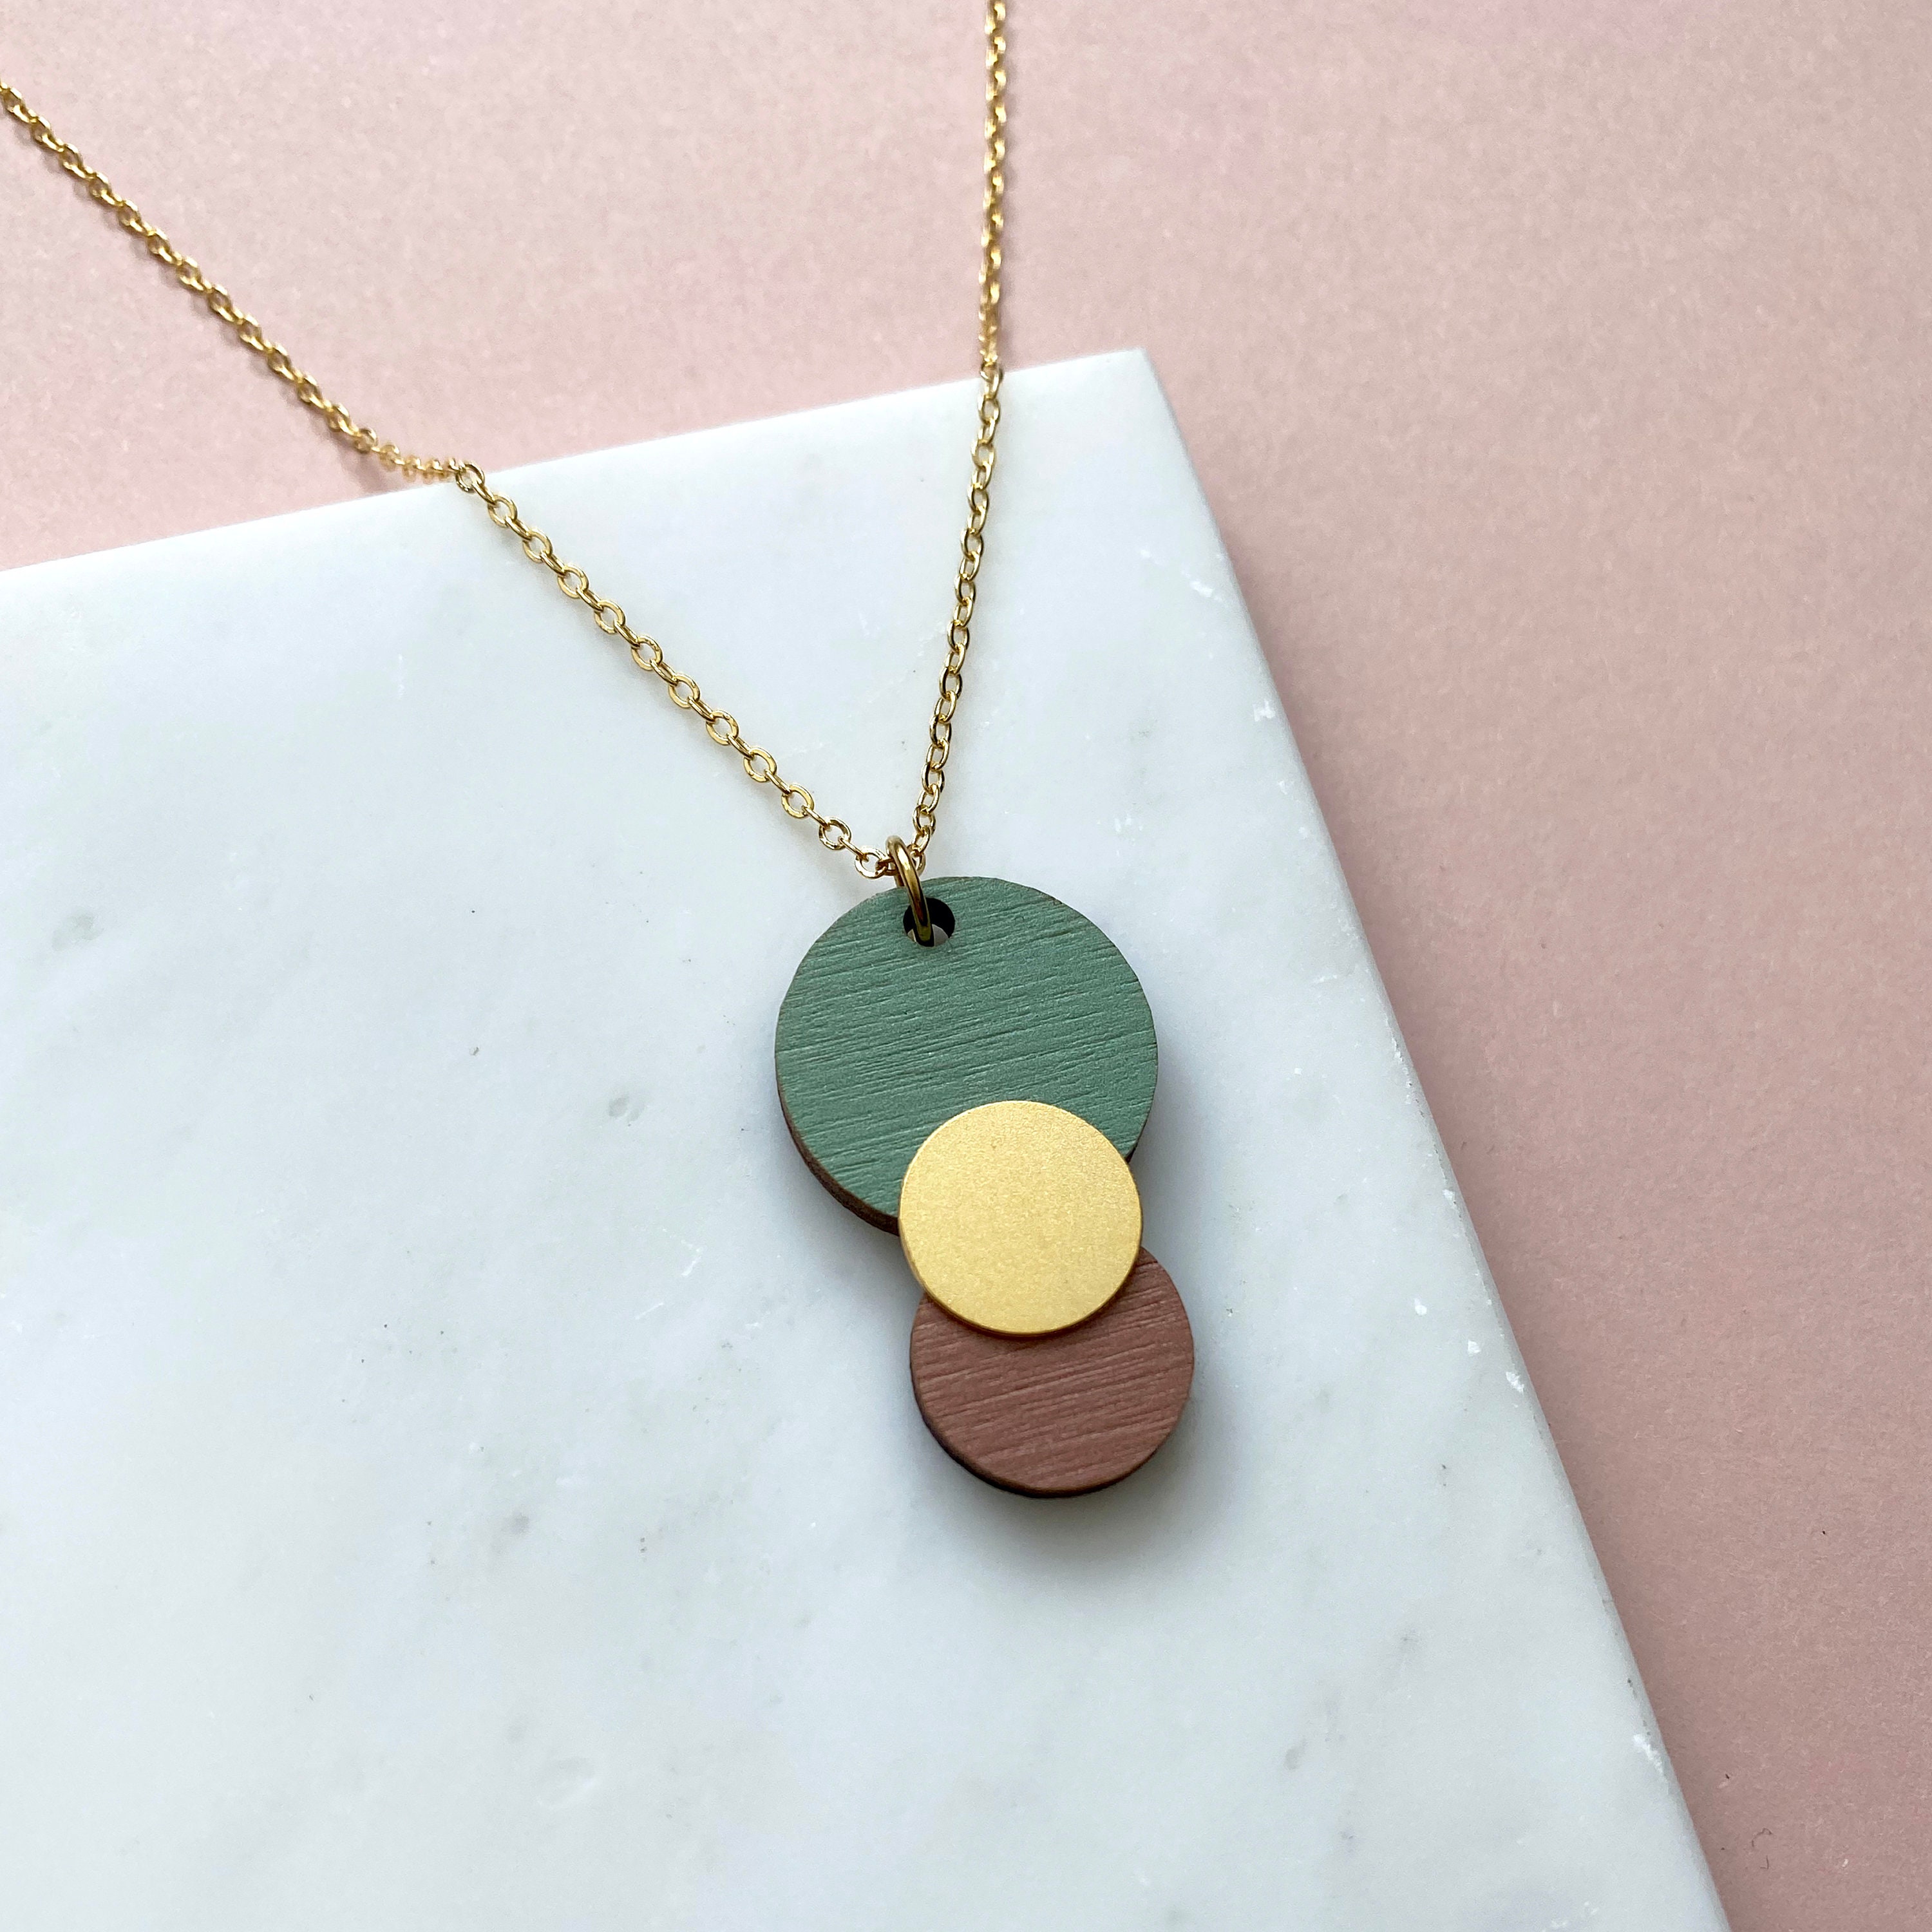 Mint, Pink & Gold Circle Pendant - Geometric Necklace Minimalist Gift For Her